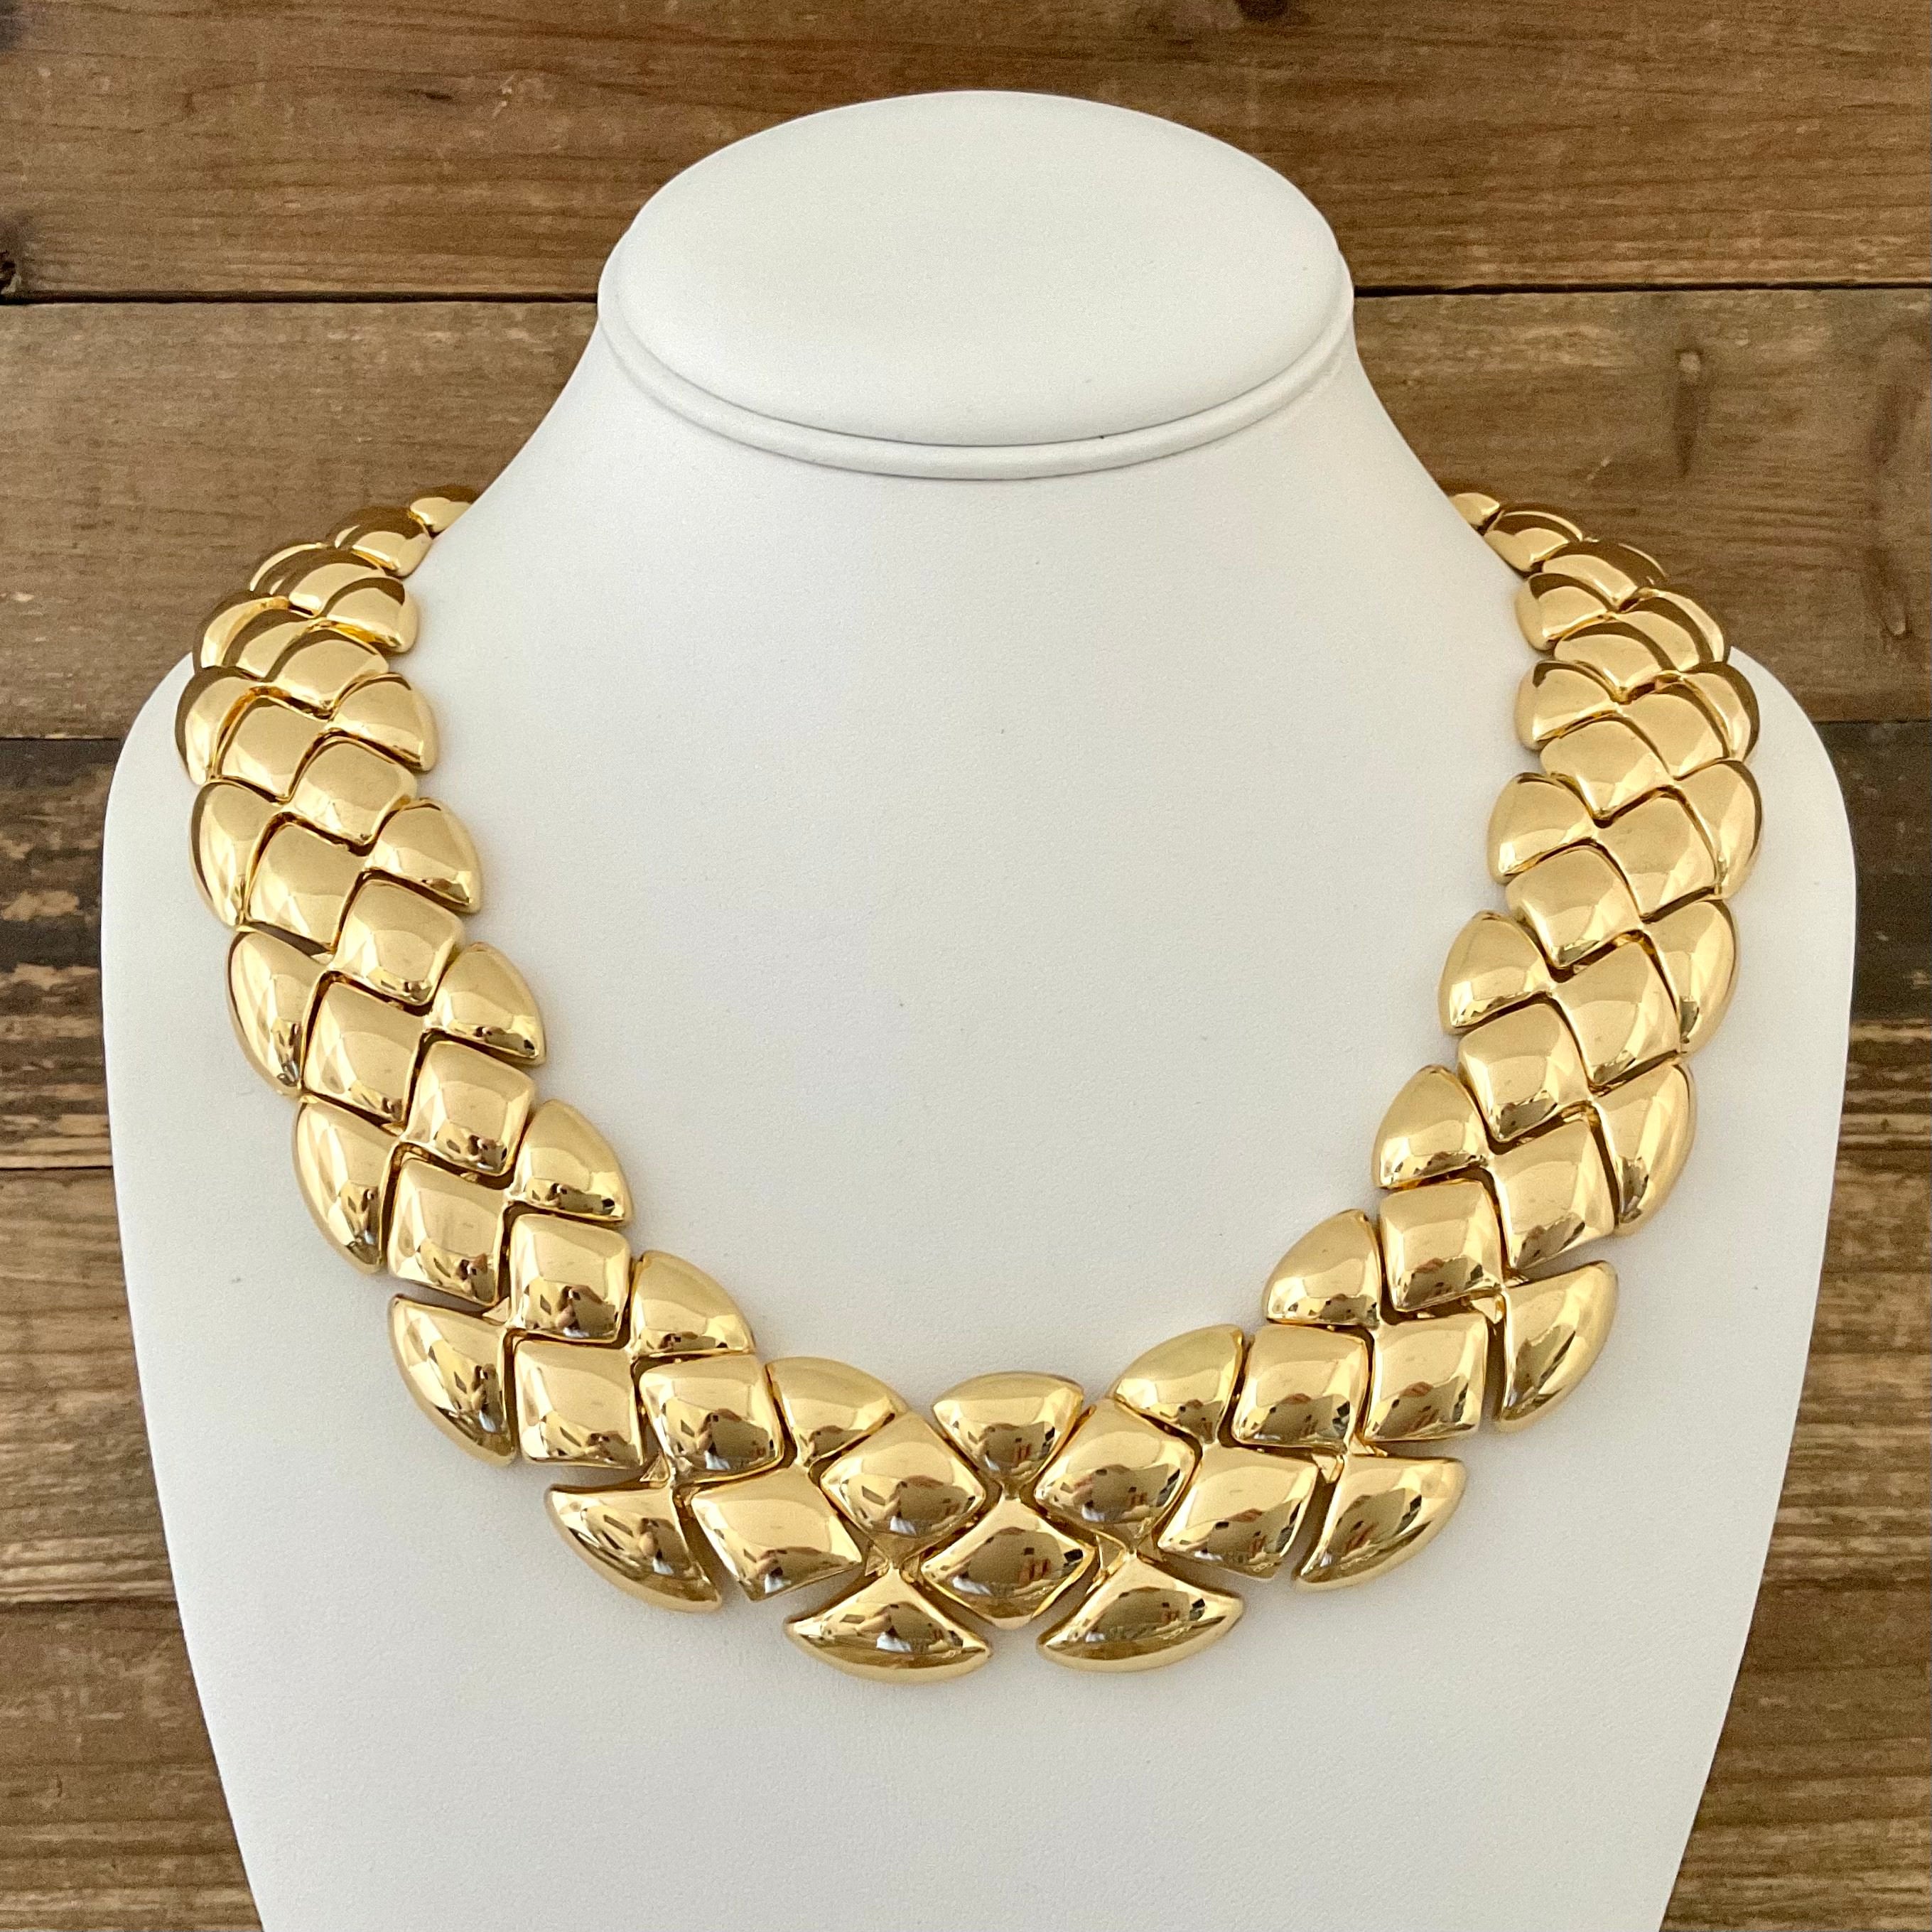 Gold Plated Vintage Collar Necklace